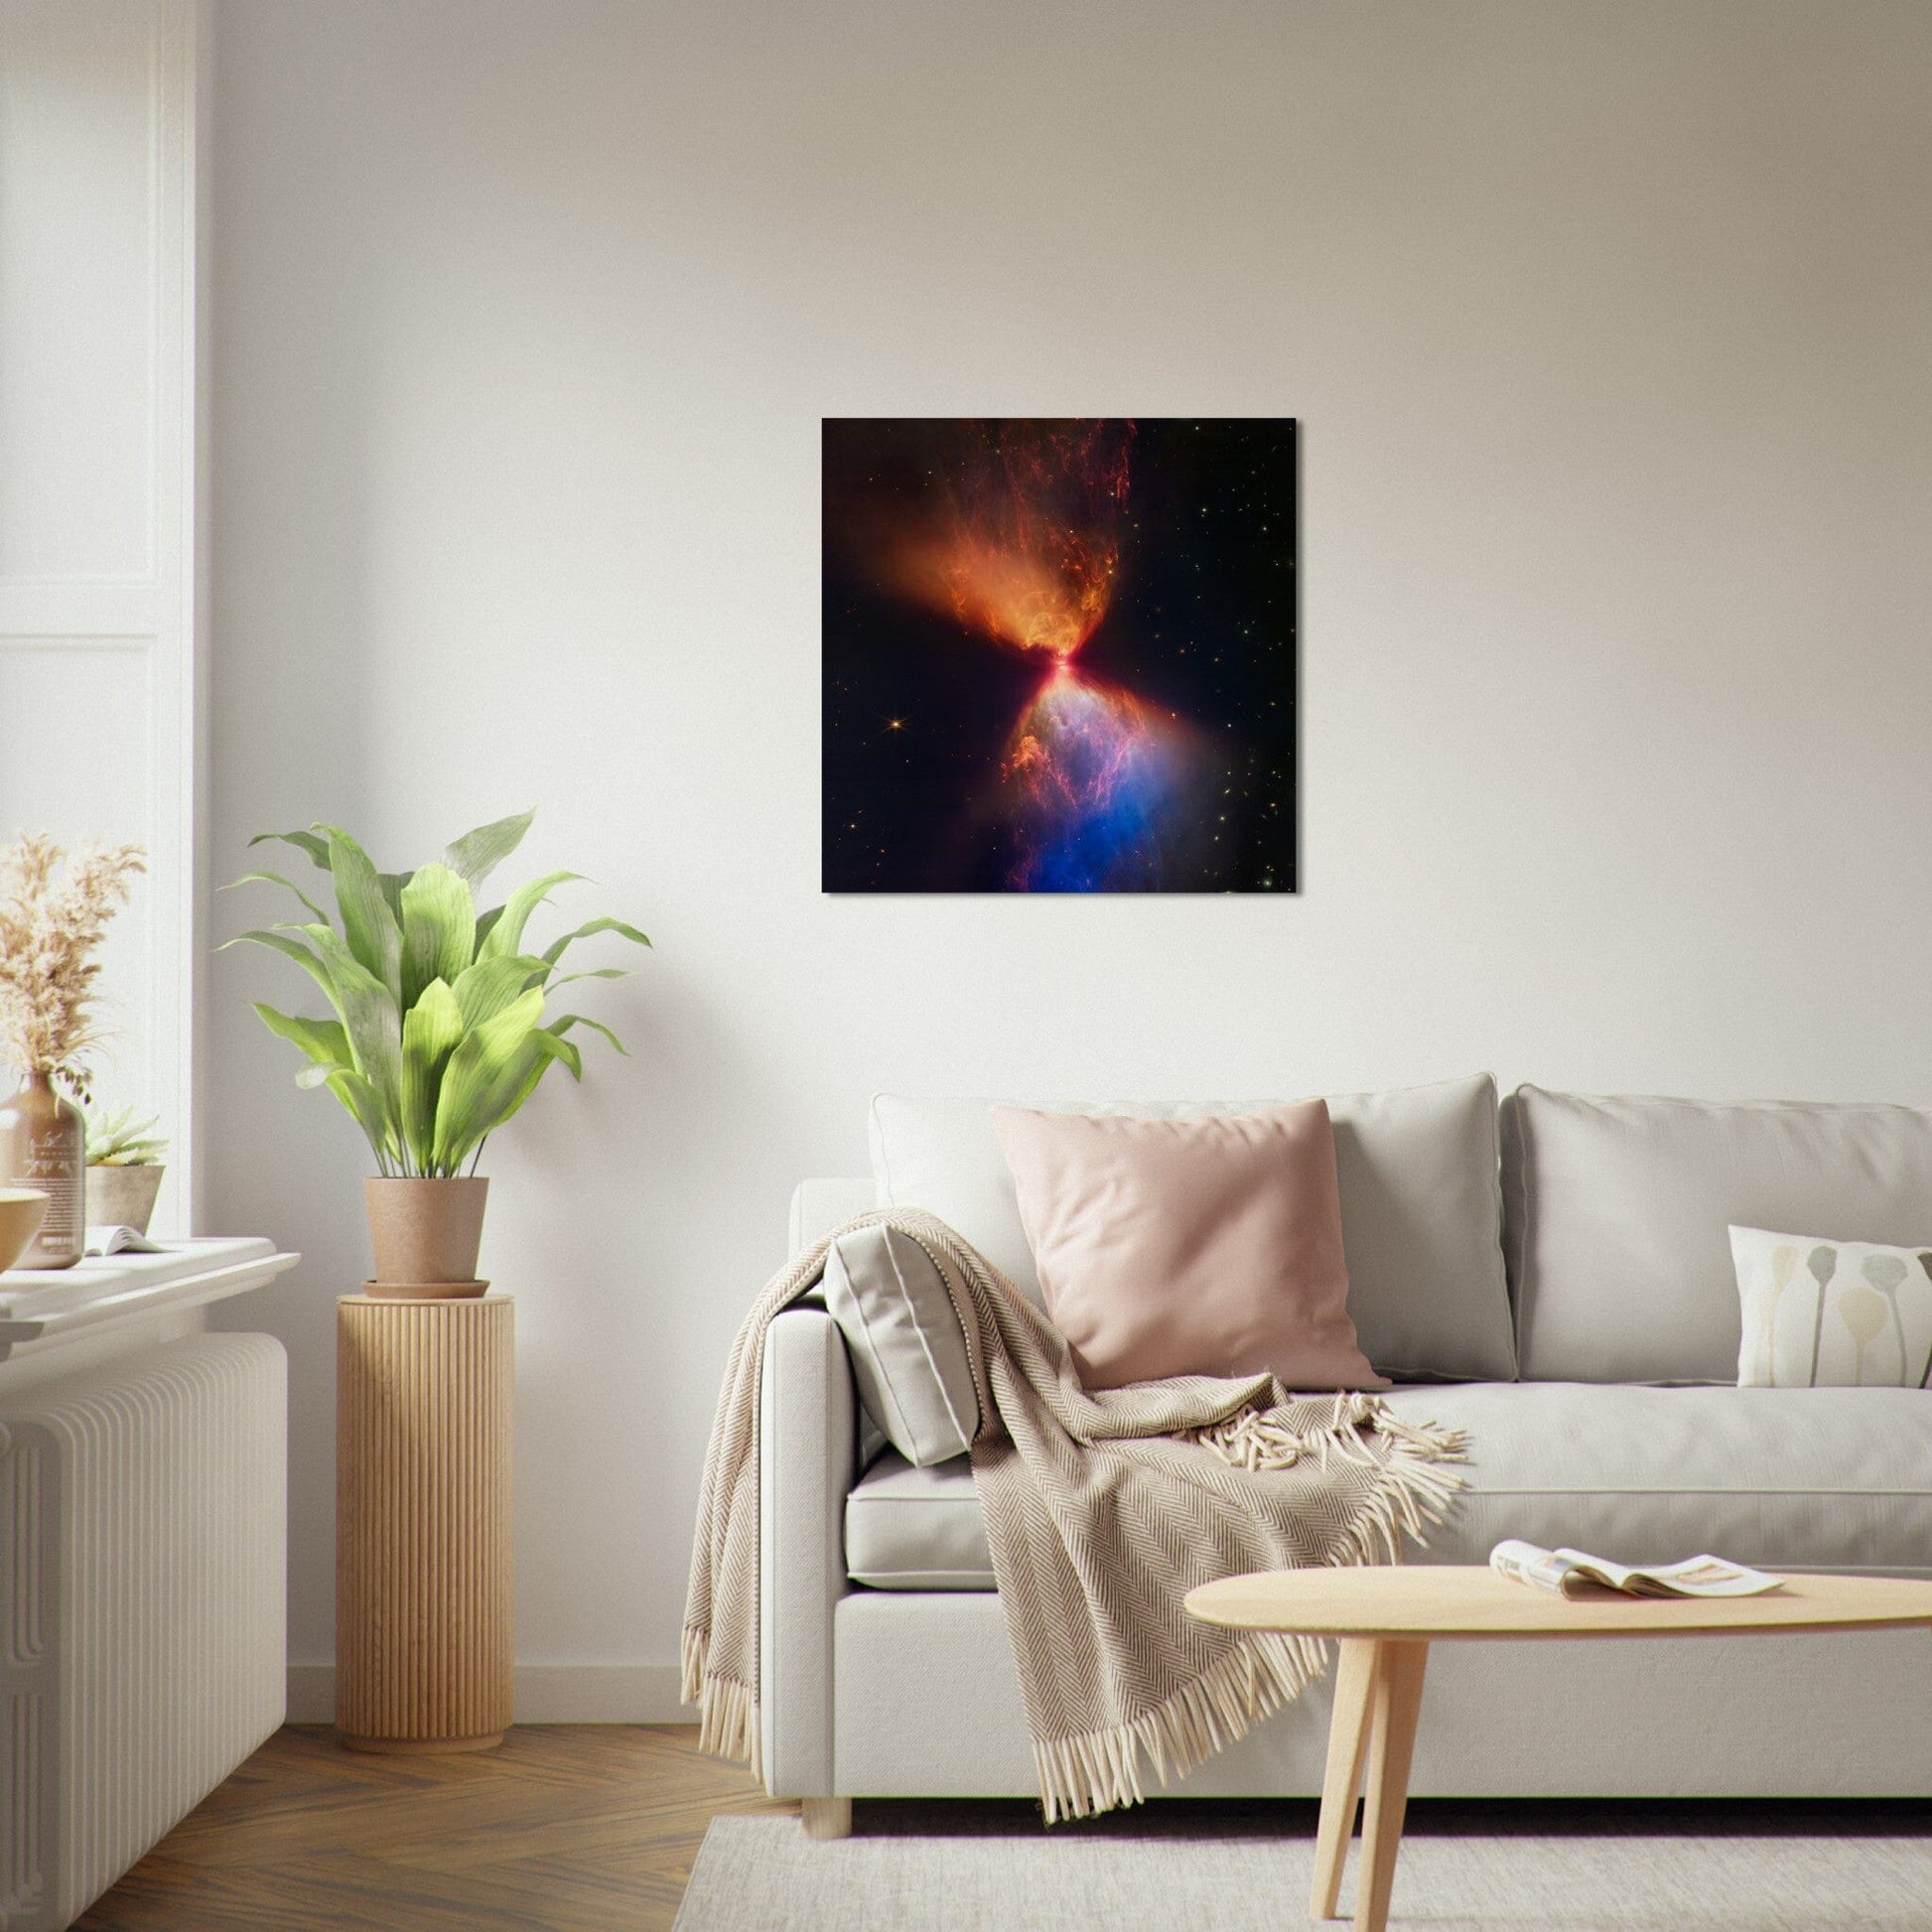 NASA - Poster - 11. L1527 and Protostar (NIRCam Image) - James Webb Space Telescope Poster Only TP Aviation Art 